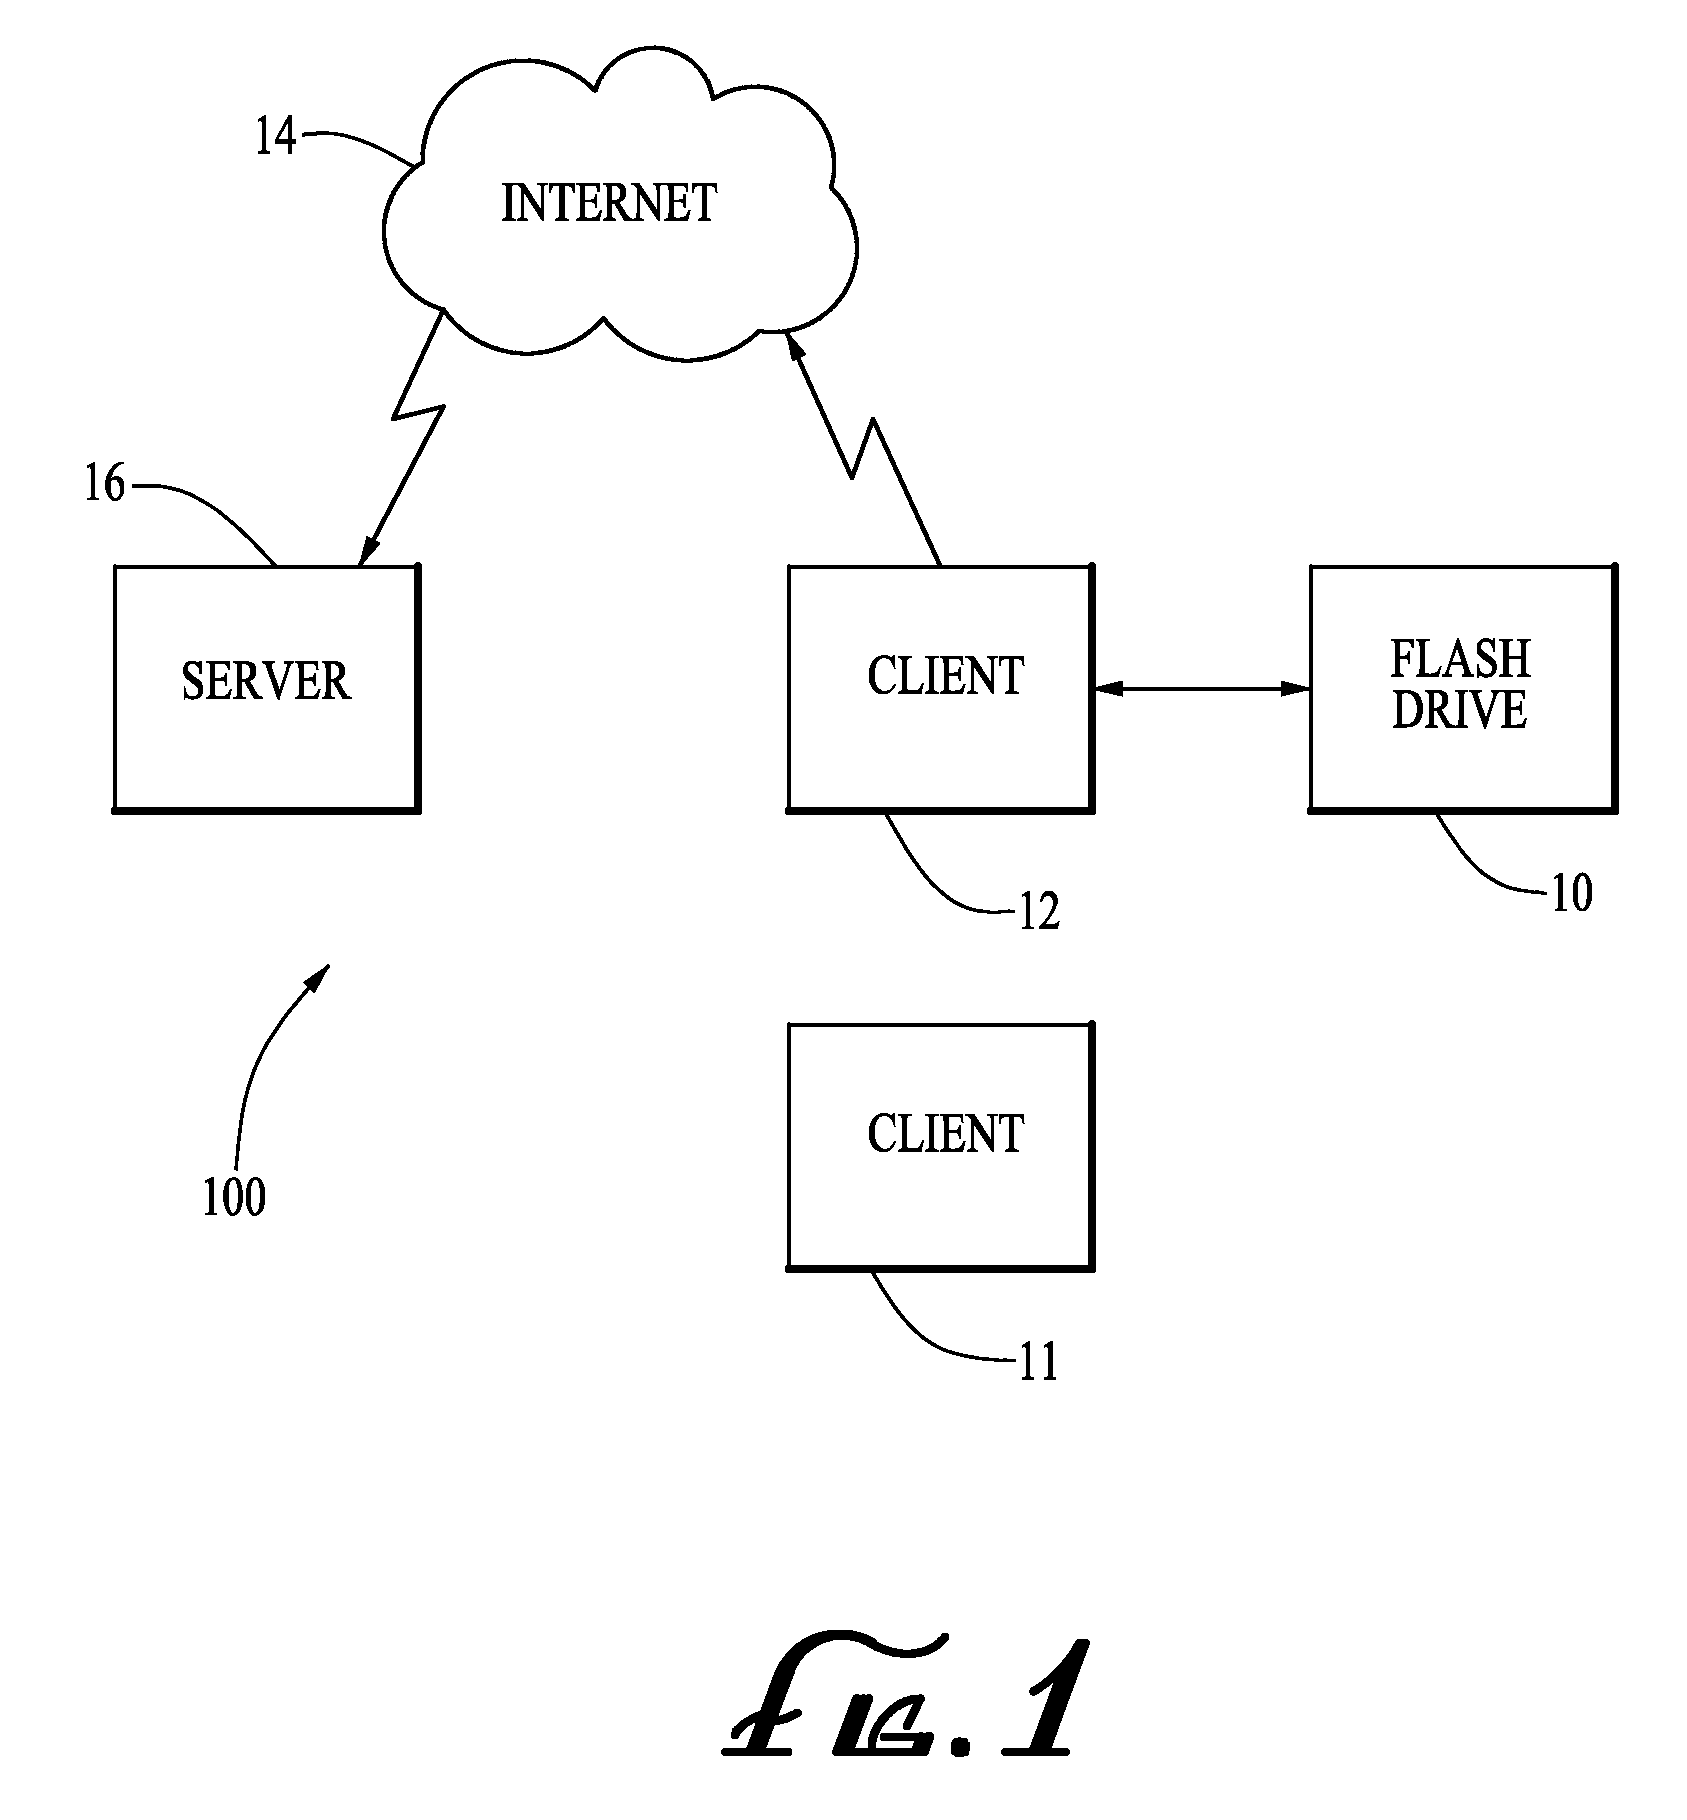 Portable memory device operating system and method of using same